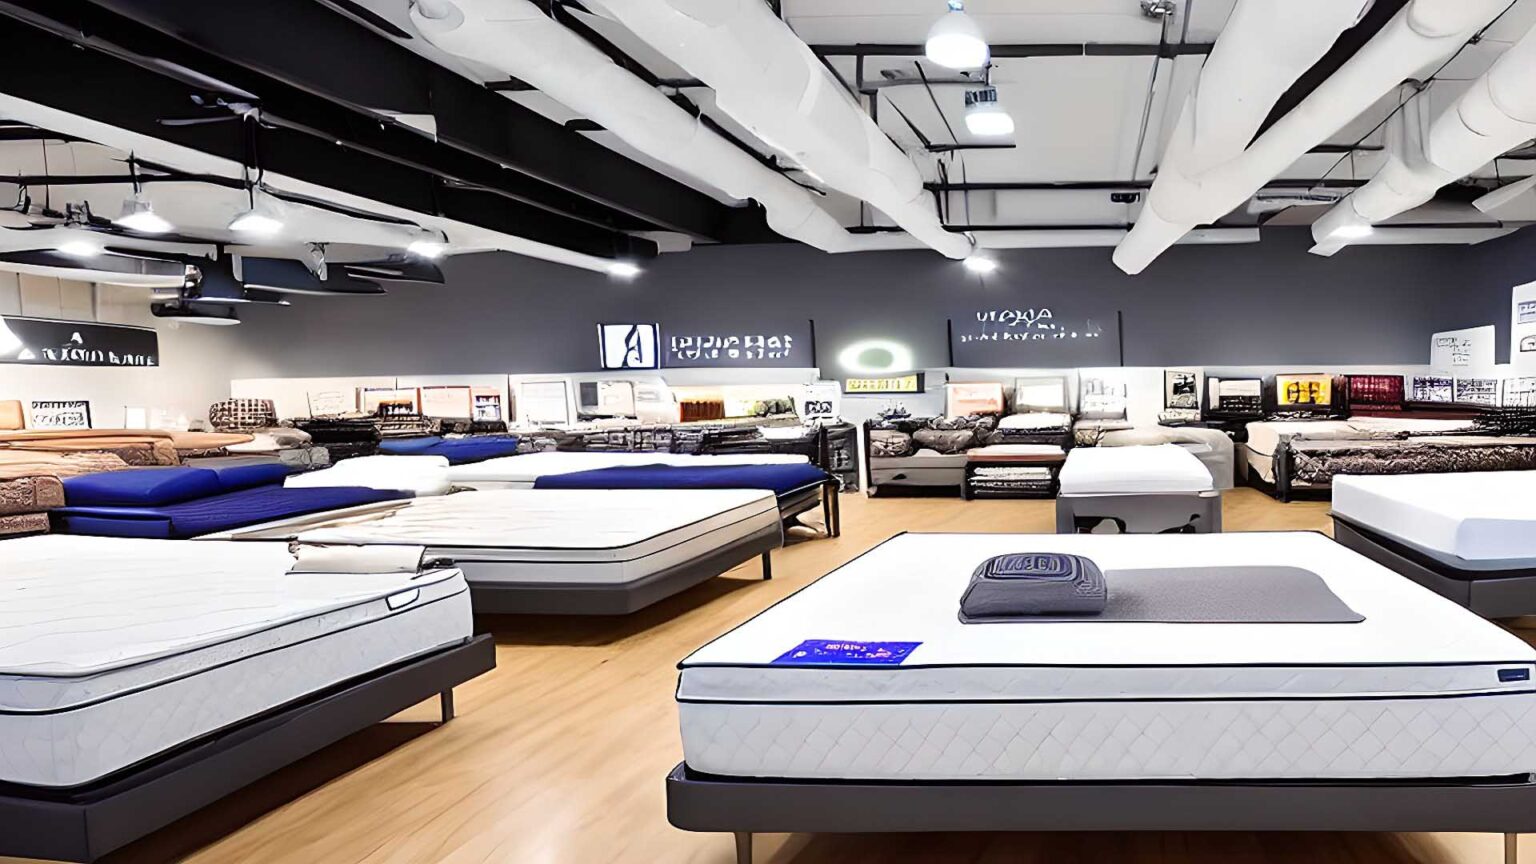 Mattress Stores, mattress dealers, and mattress retailers near me in Chicago, IL